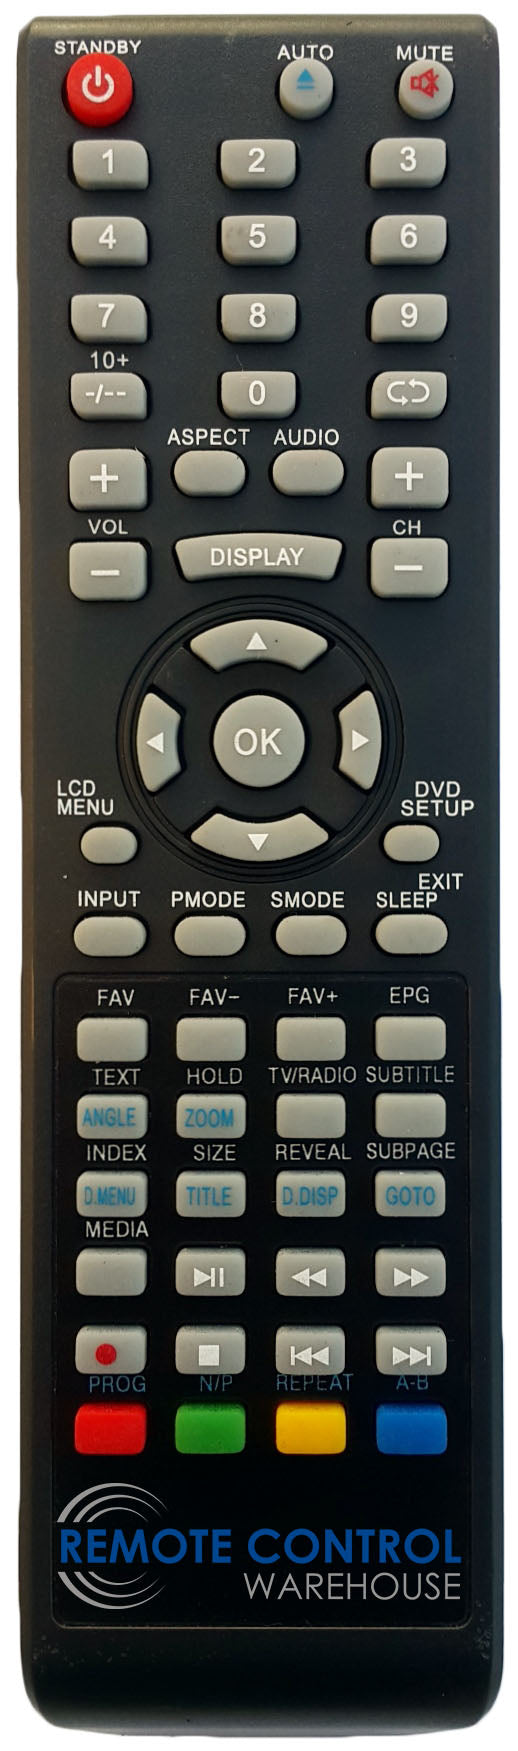 TECOVISION LED22BFRDWHBD LCD TV REPLACEMENT REMOTE CONTROL RC-W023